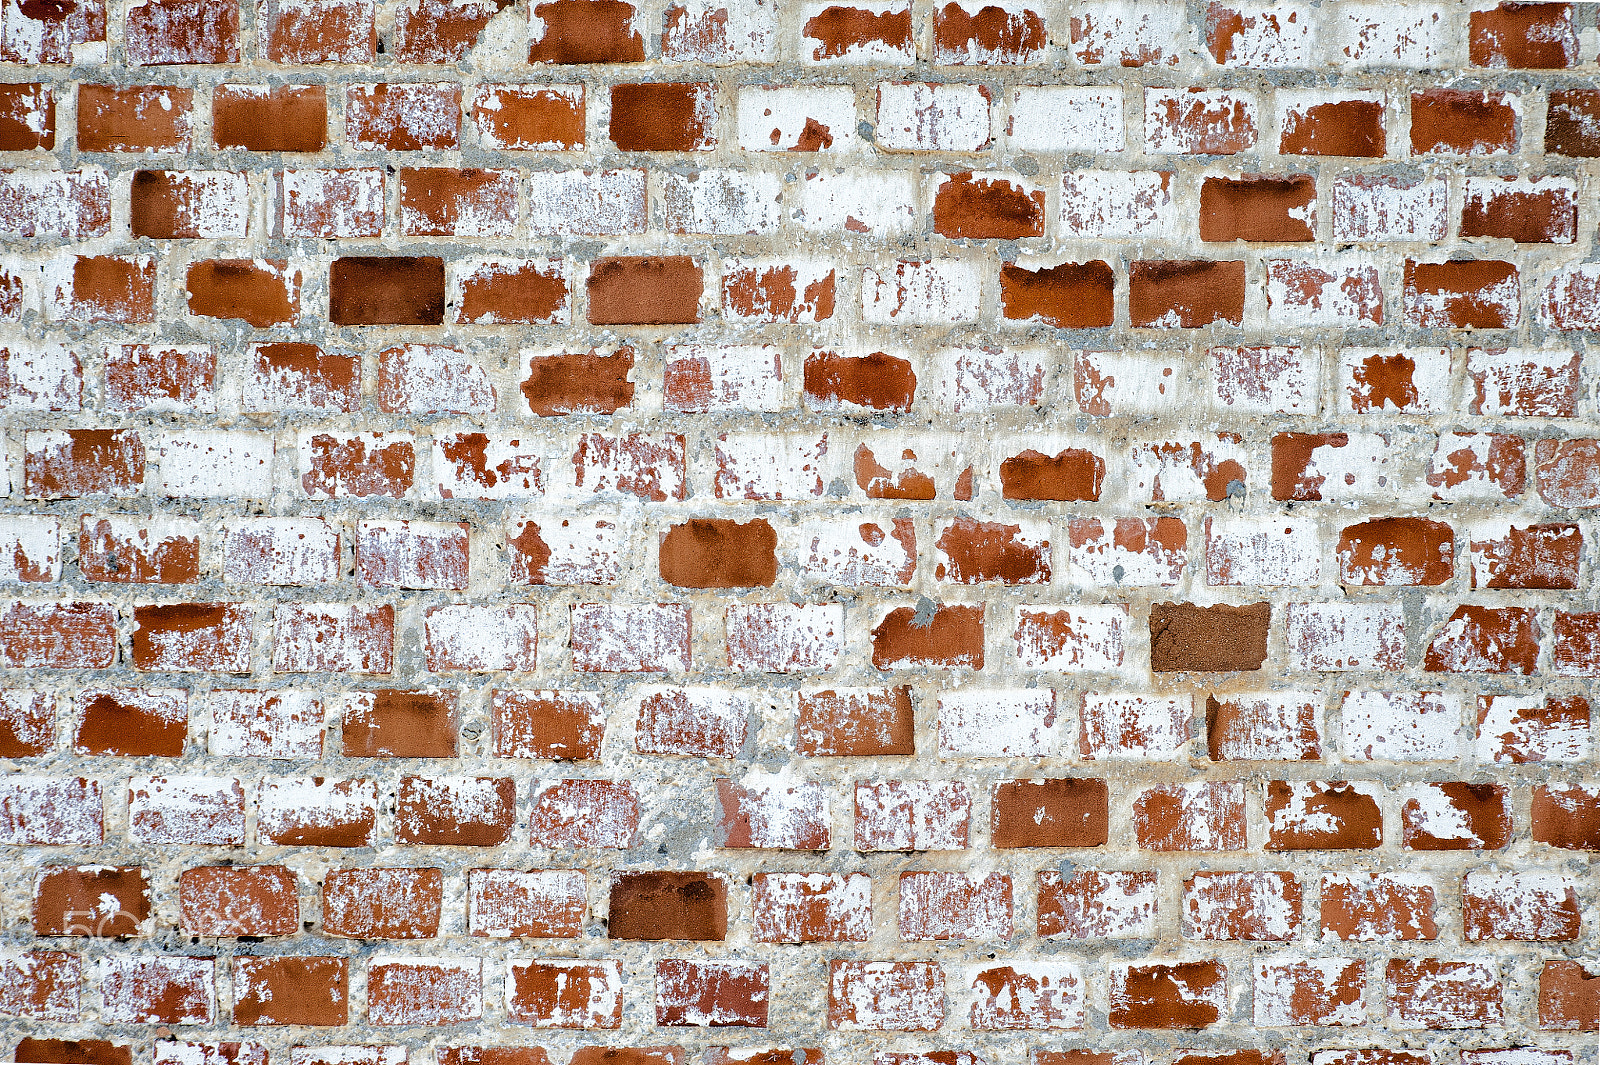 Nikon D700 sample photo. Wall of red and white bricks without graffiti photography